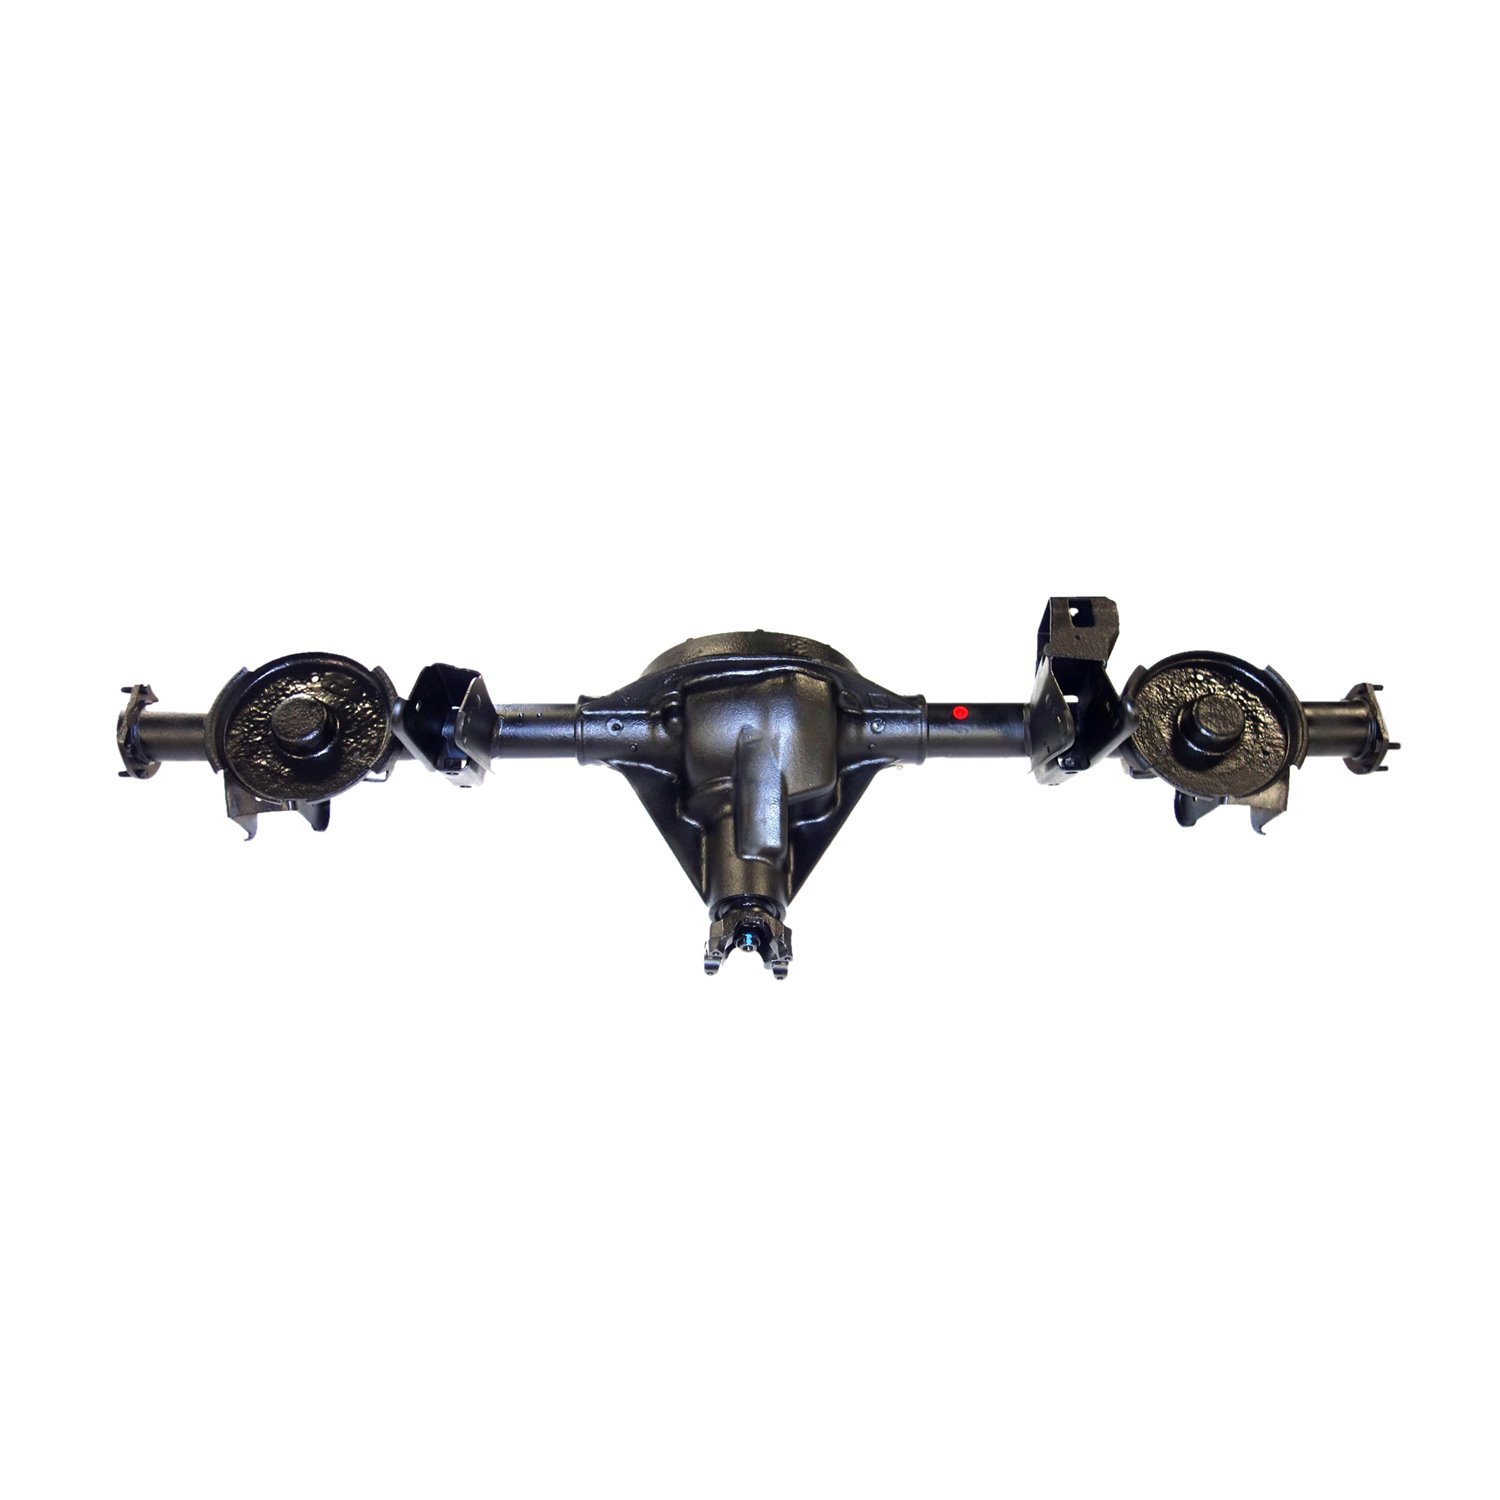 Remanufactured Complete Axle Assembly for Dana 35 97-02 Jeep Wrangler 3.07 Ratio, ABS